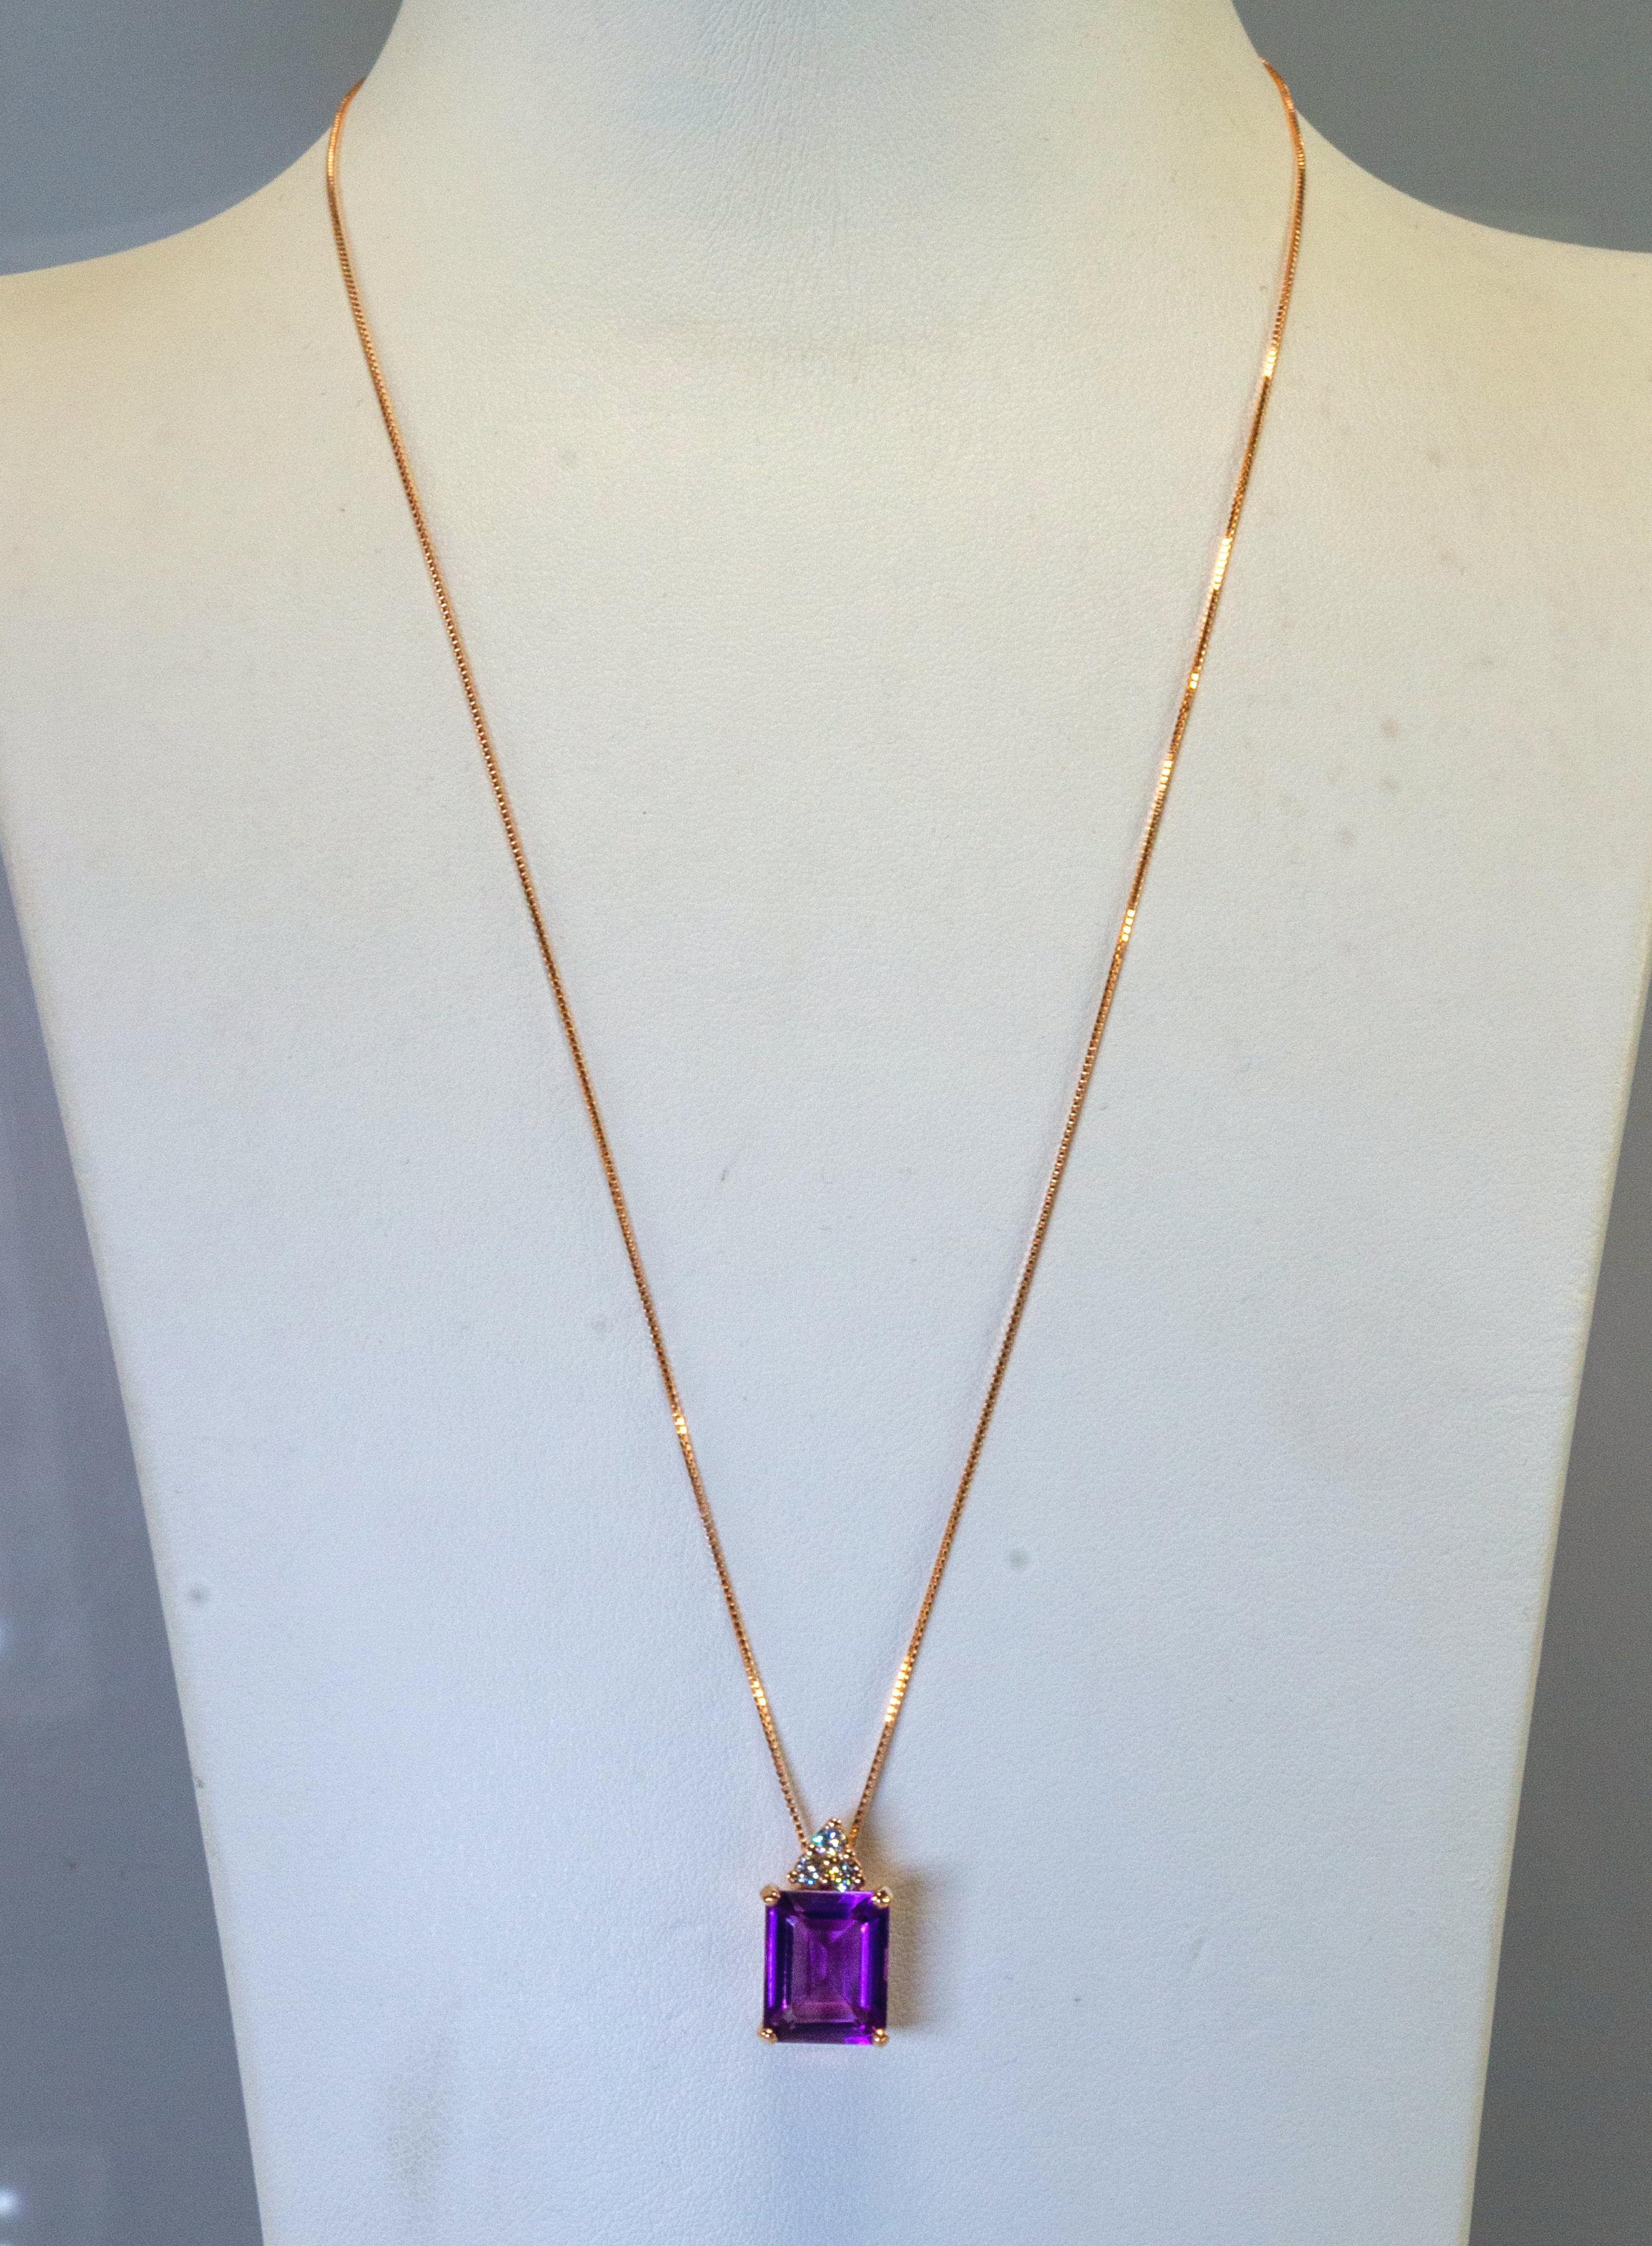 Chain and pendant in 18-carat pink gold with a splendid rectangular amethyst enriched by 3 diamonds arranged in a triangle at the top.
The pendant contains:
- 1 amethyst, emerald cut, dimensions 12 mm x 9 mm, 4.20 carats
- 3 natural diamonds,